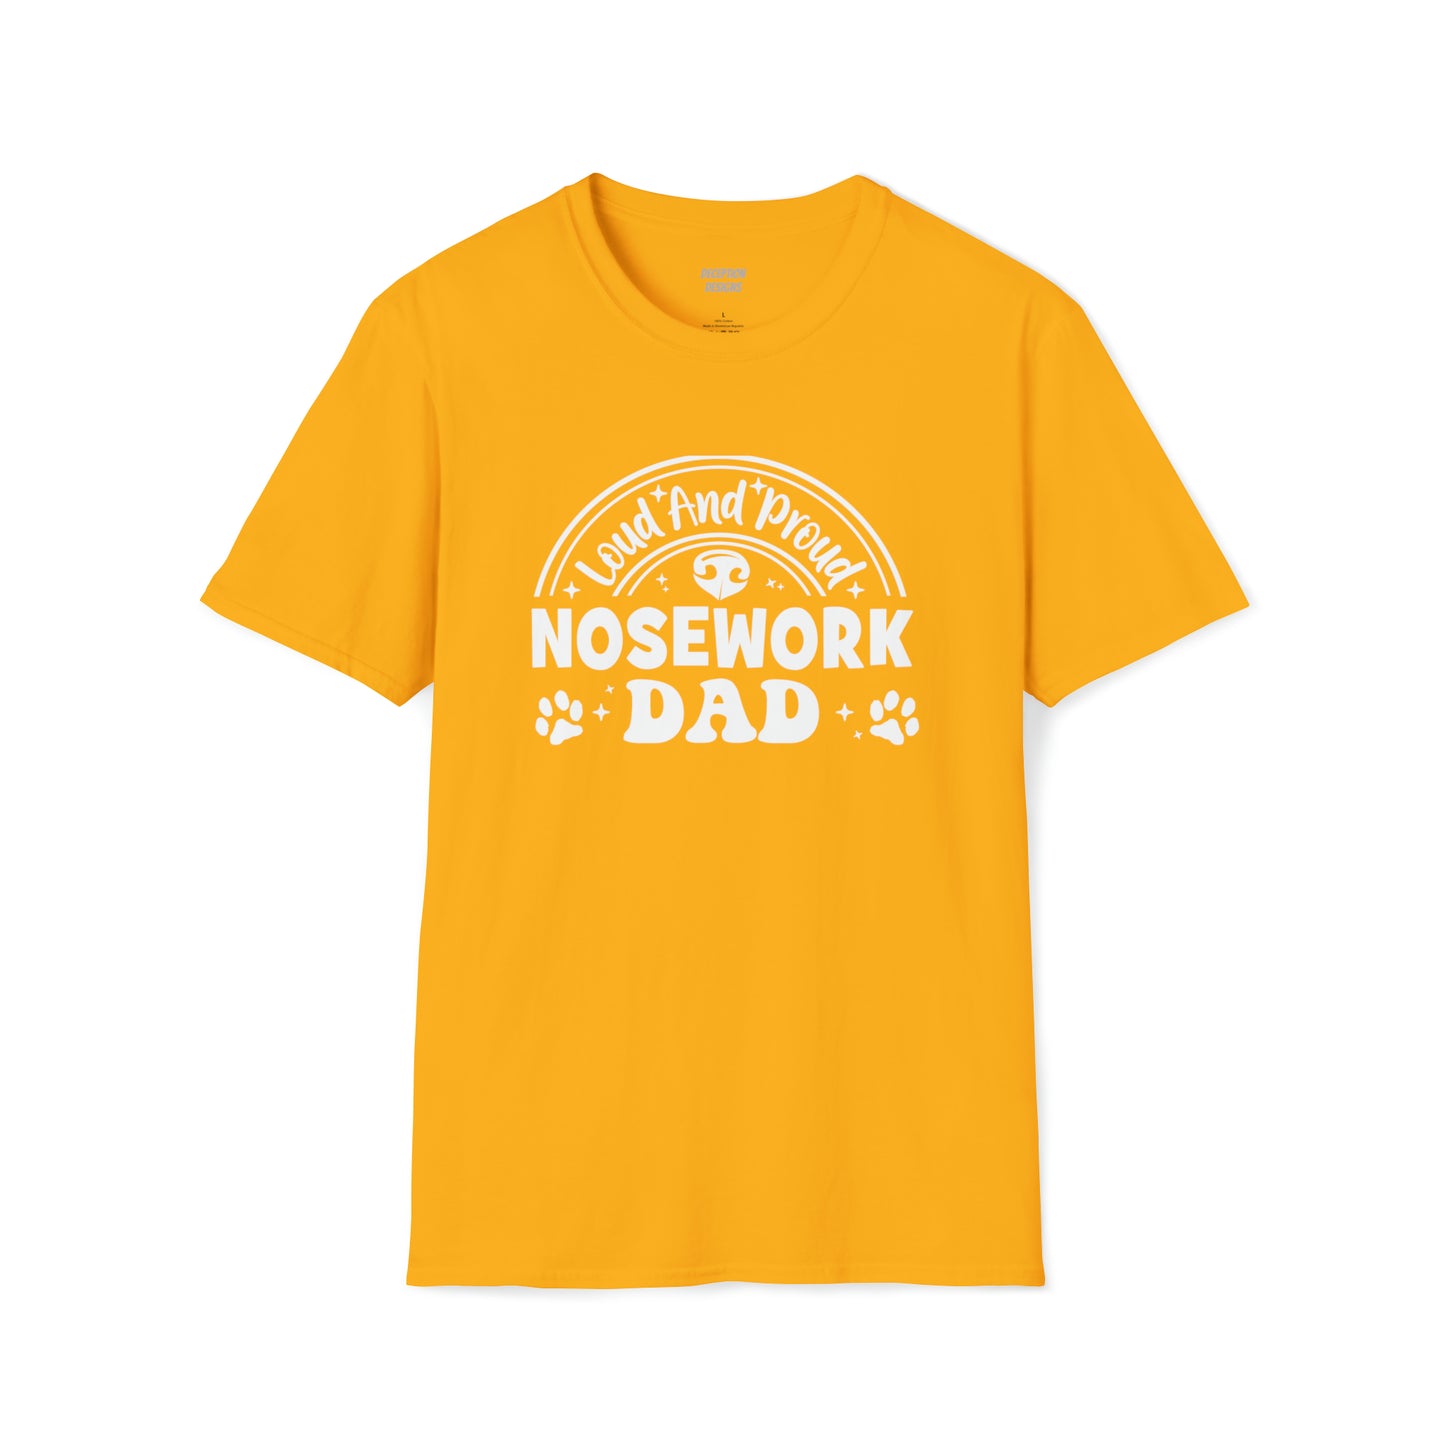 LOUD PROUD NOSEWORK DAD 2 -  Unisex Softstyle T-Shirt